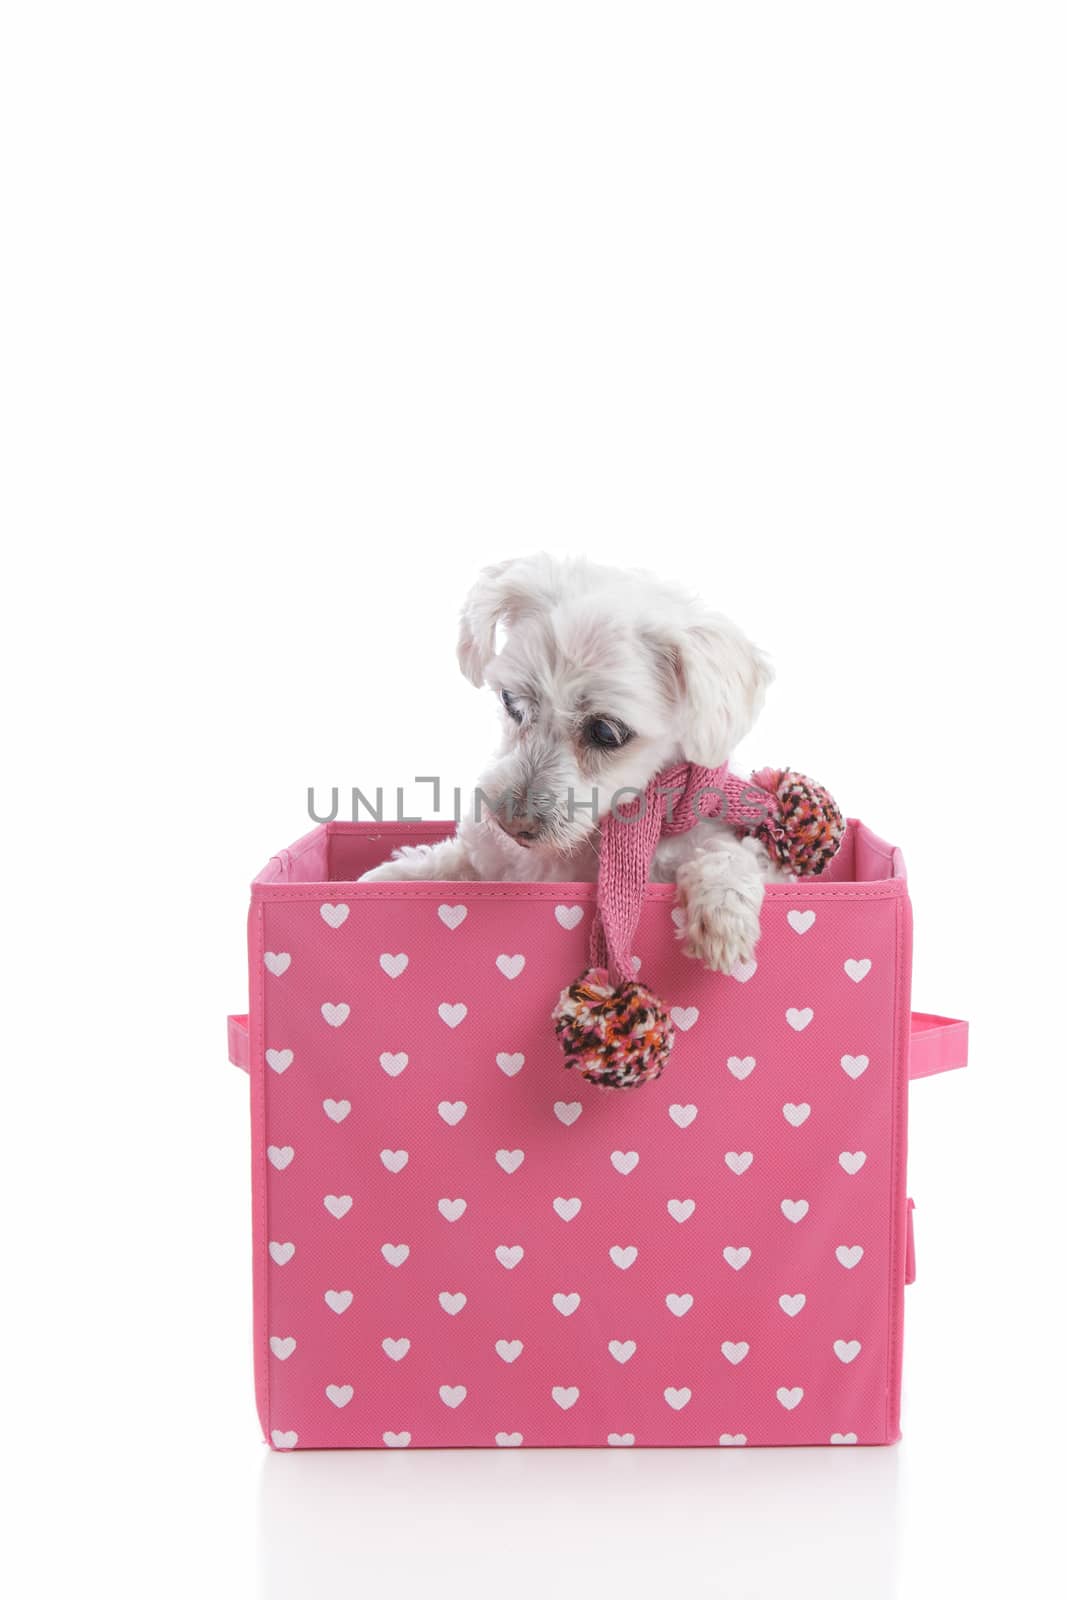 Puppy dog in love heart box by lovleah